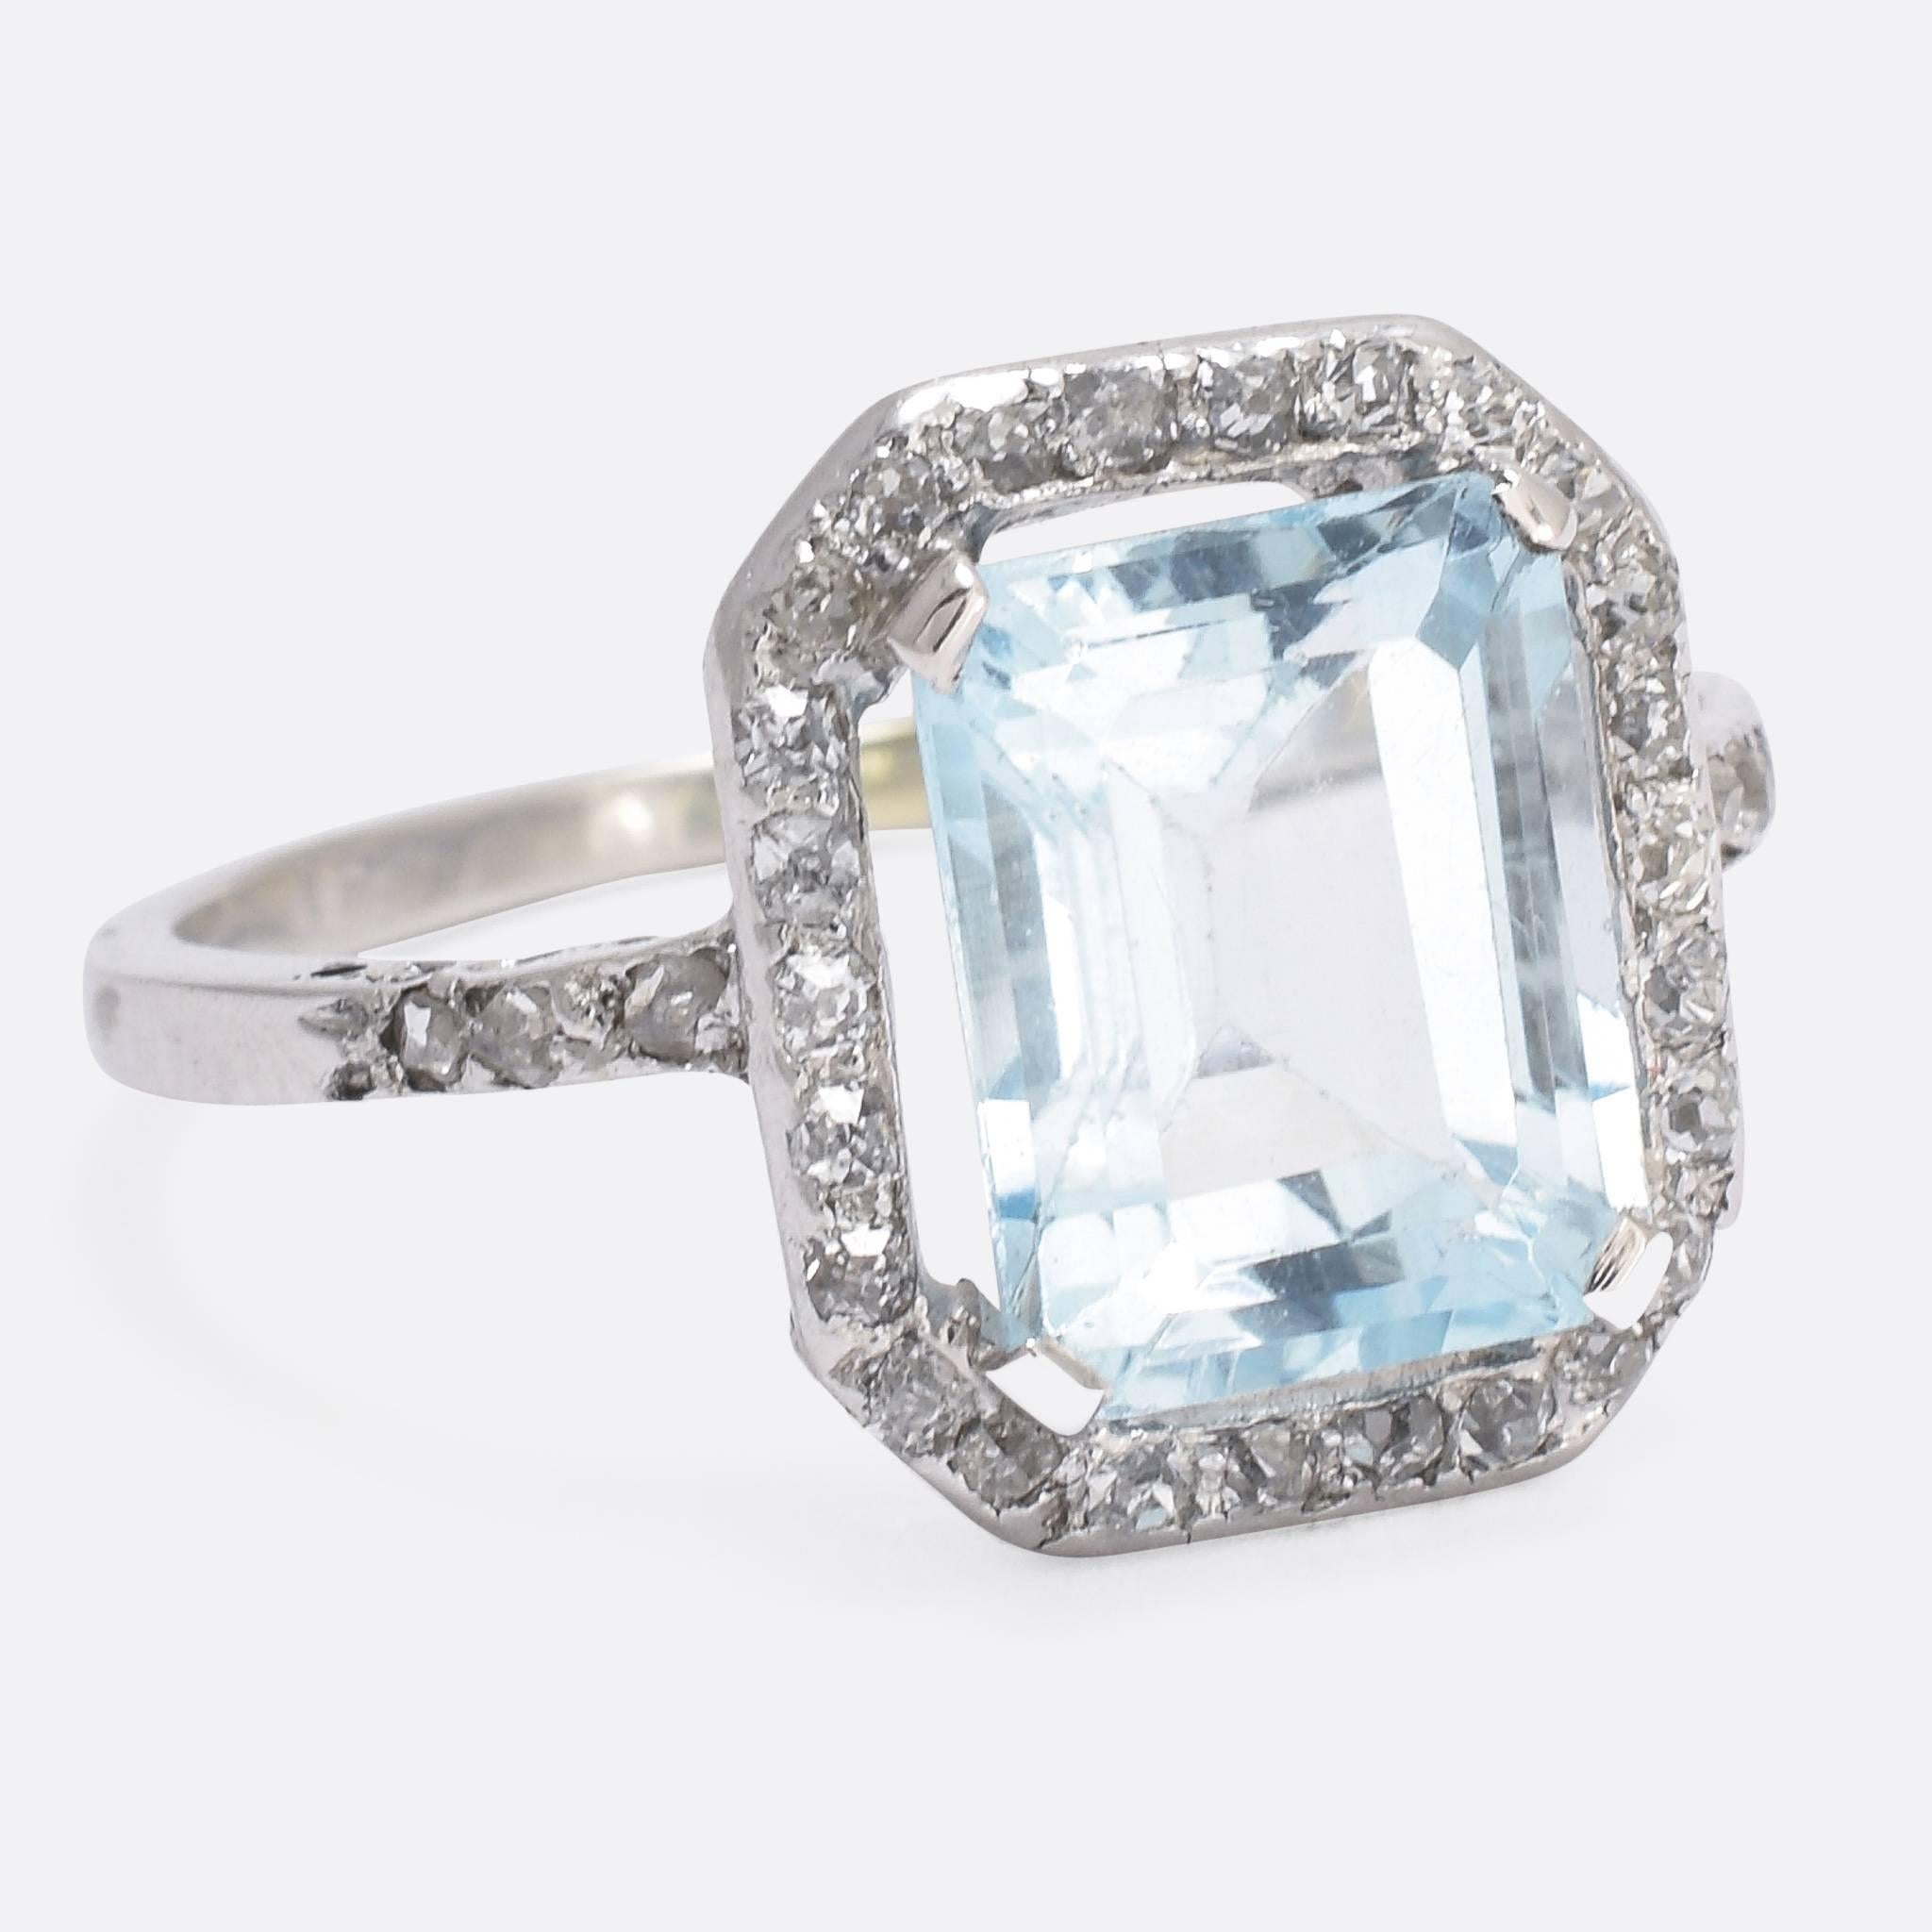 This beautiful antique engagement ring is set with a sublime 4 carat aquamarine, of excellent pale-blue colour, and a cluster of old cut diamonds. The ring itself is modelled in platinum throughout, and features a lovely openworked gallery and